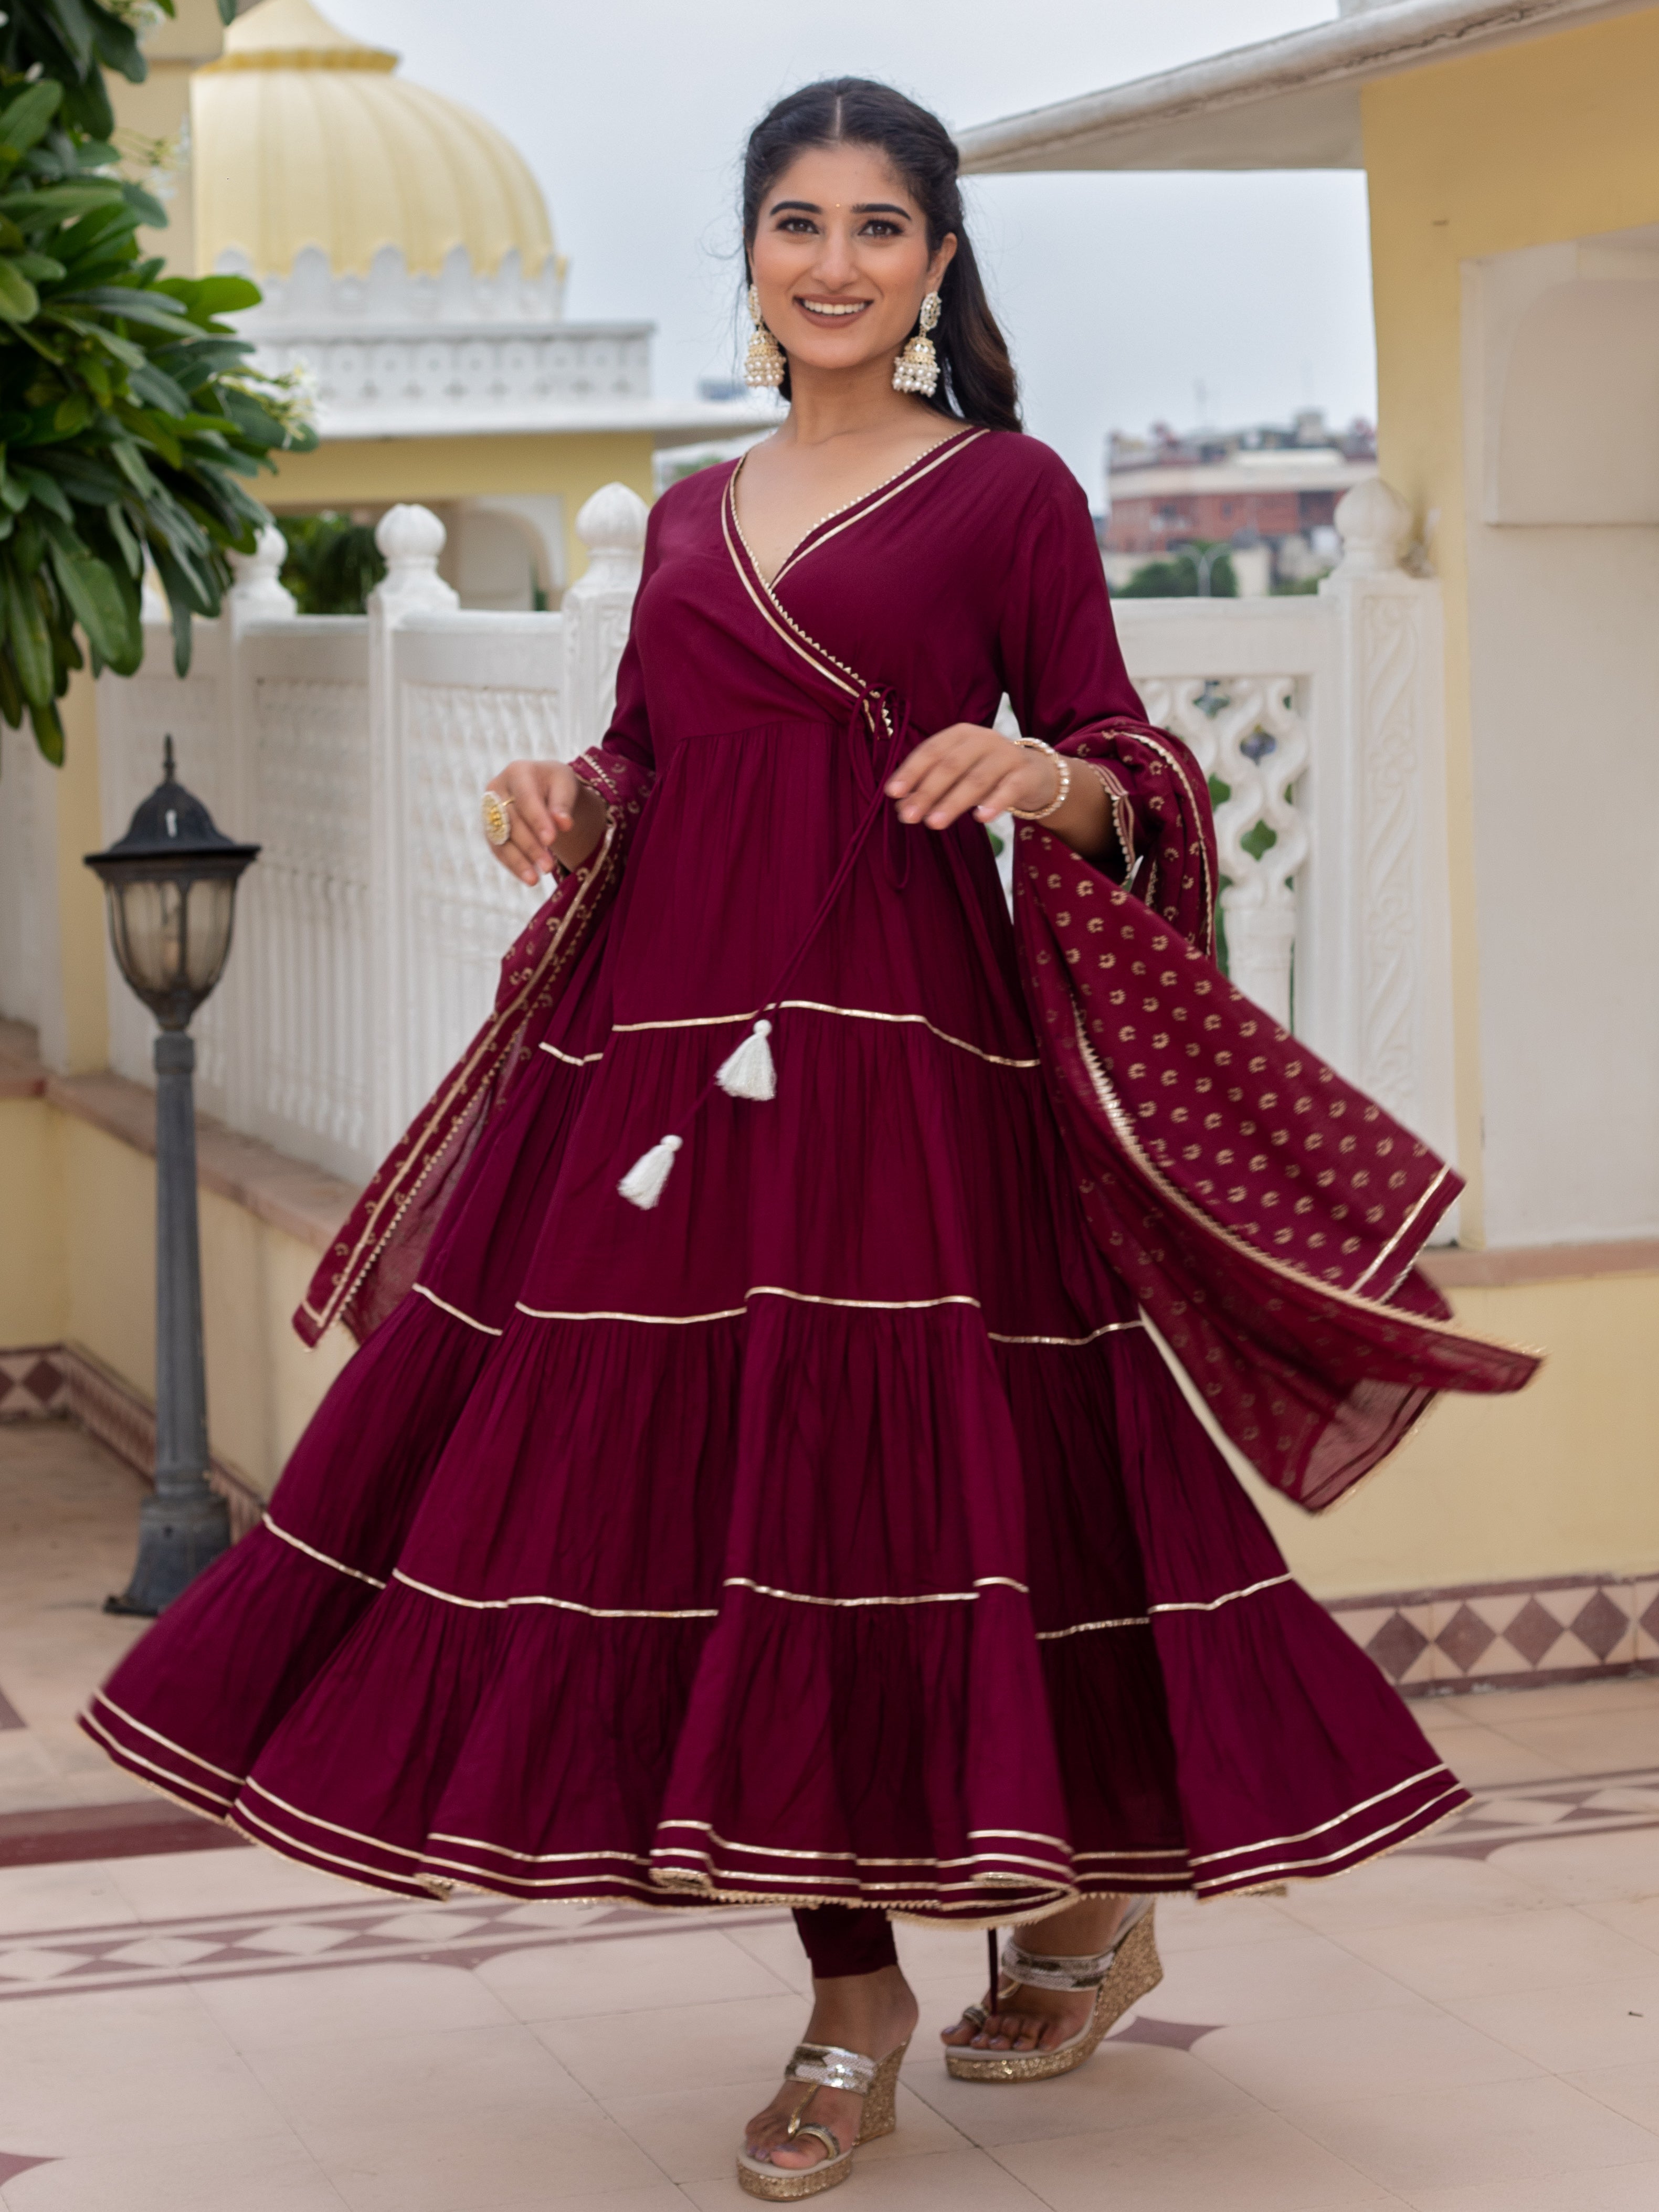 this-burgundy-tiered-kurta-has-been-expertly-crafted-with-a-stylish-tiered-design-featuring-a-kurta-pants-and-a-dupatta-this-three-piece-outfit-will-add-a-touch-of-elegance-to-any-wardrobe